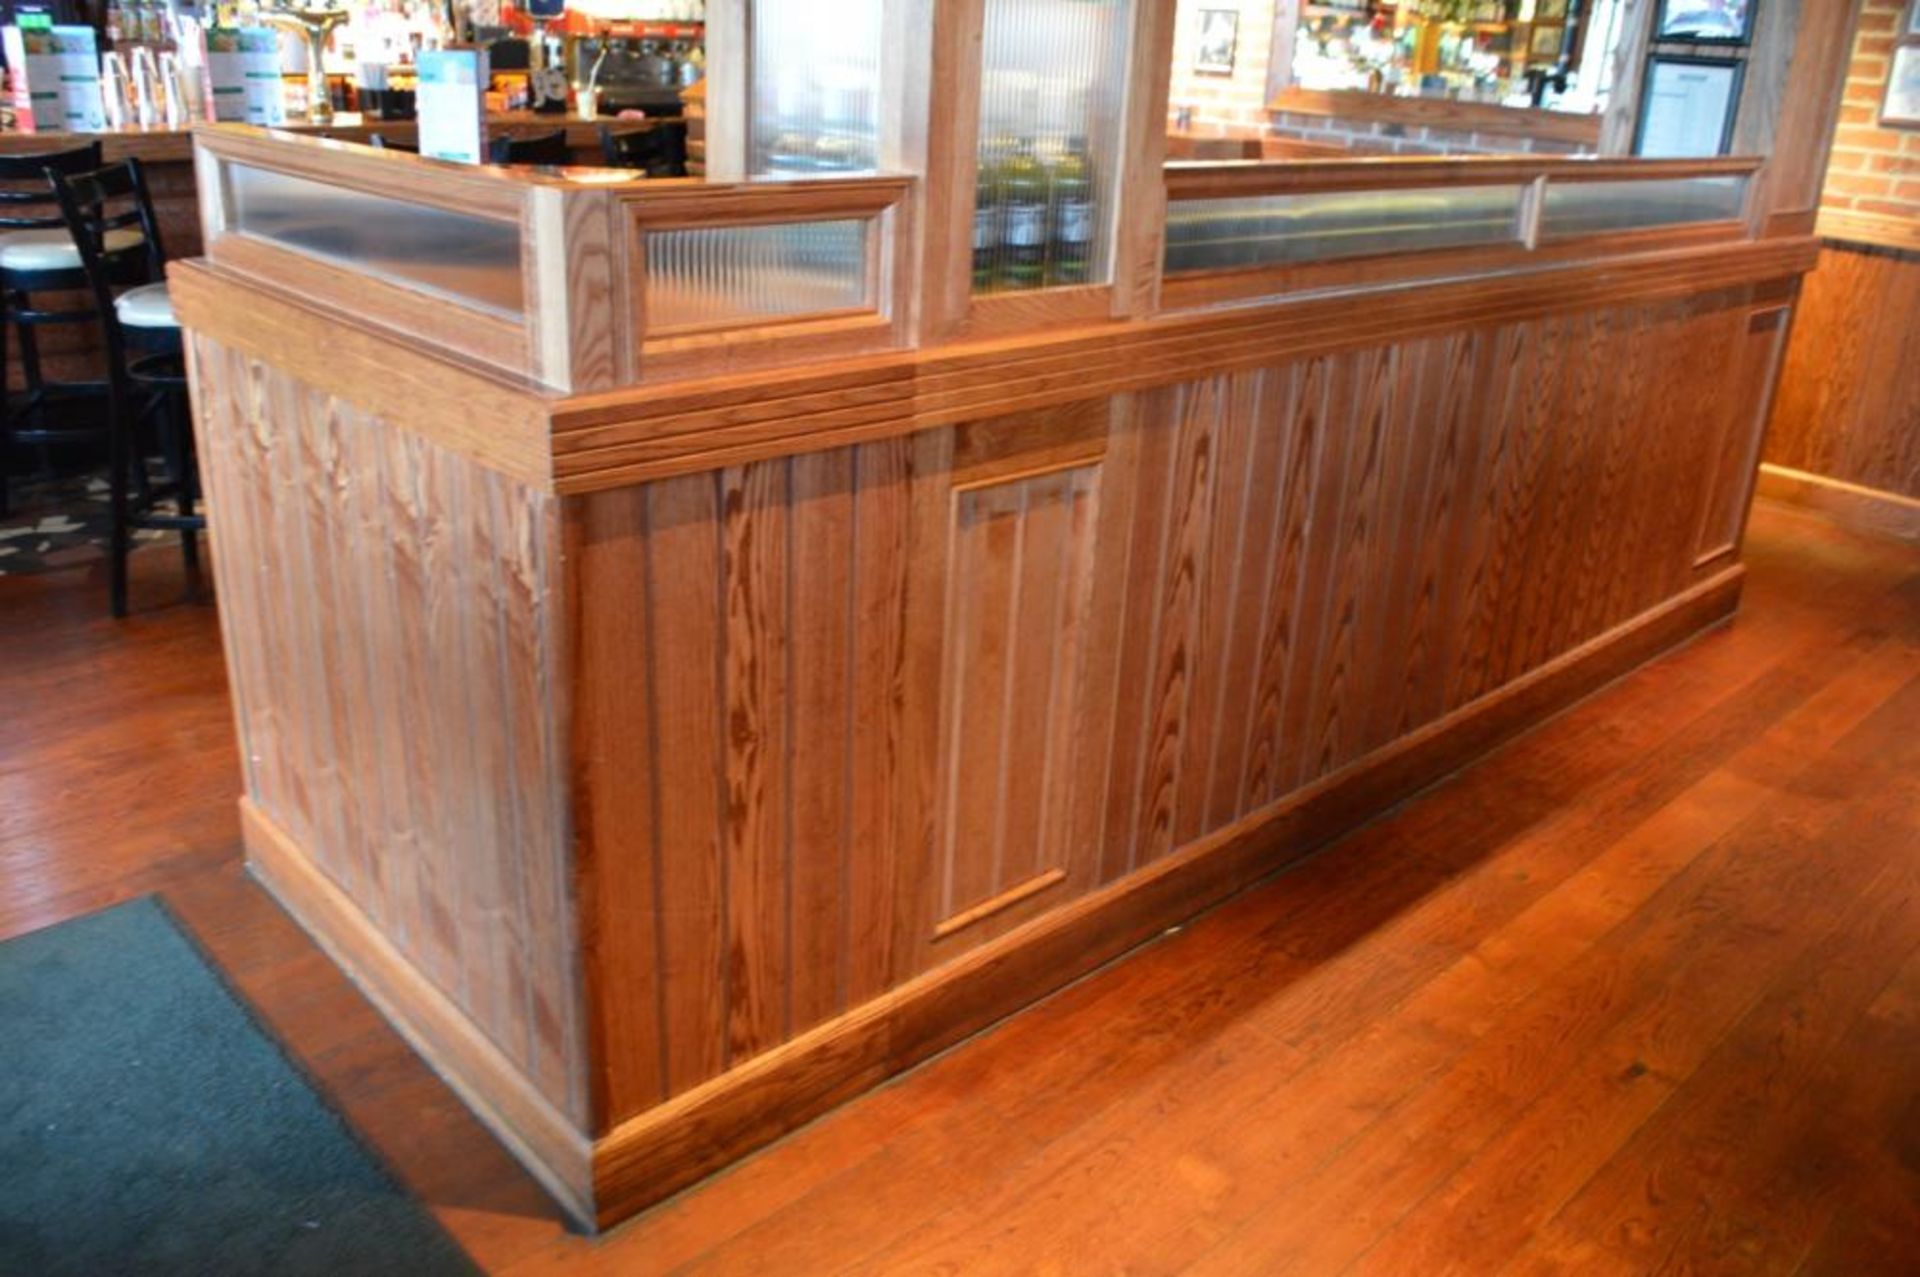 1 x Bar Restaurant Room Partition With Seating Bench, Pillar, Wine Cabinet and Foot Rest - Overall S - Image 16 of 21